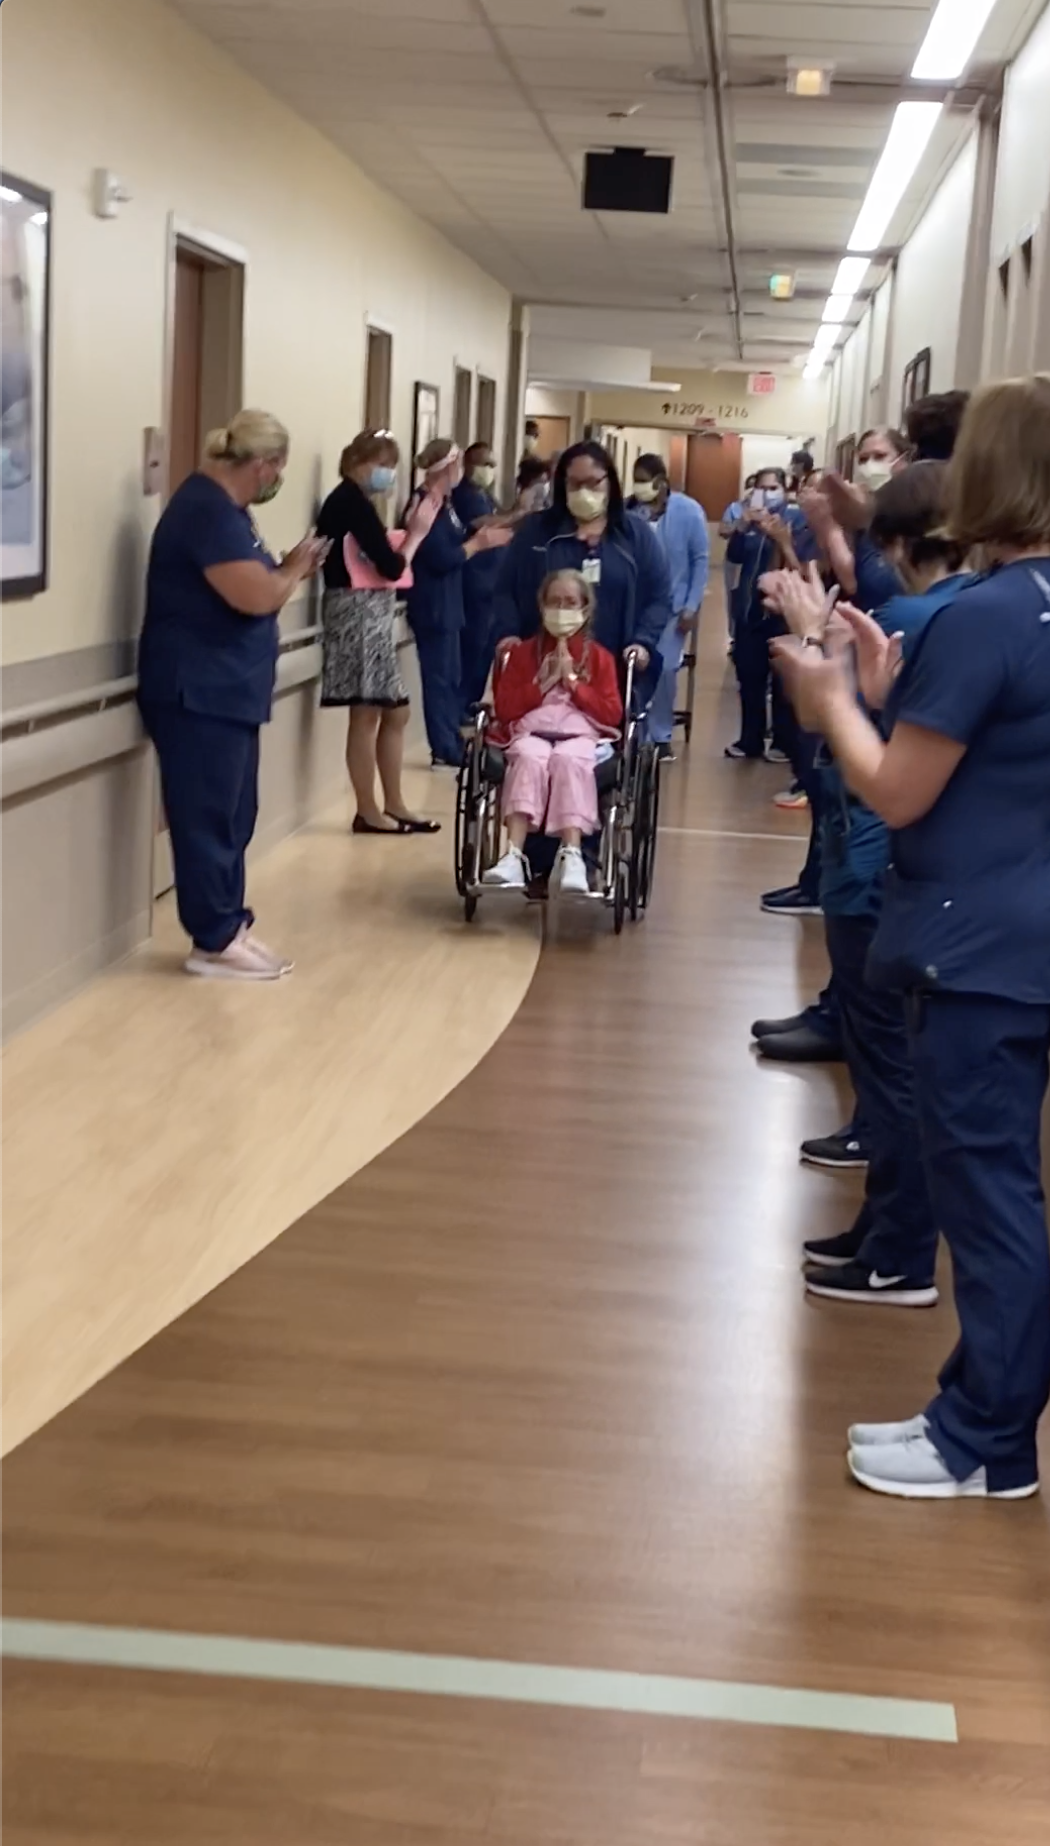 After almost five weeks at AdventHealth Daytona Beach, Jenny Sanchez was able to go home. Video still courtesy of AdventHealth